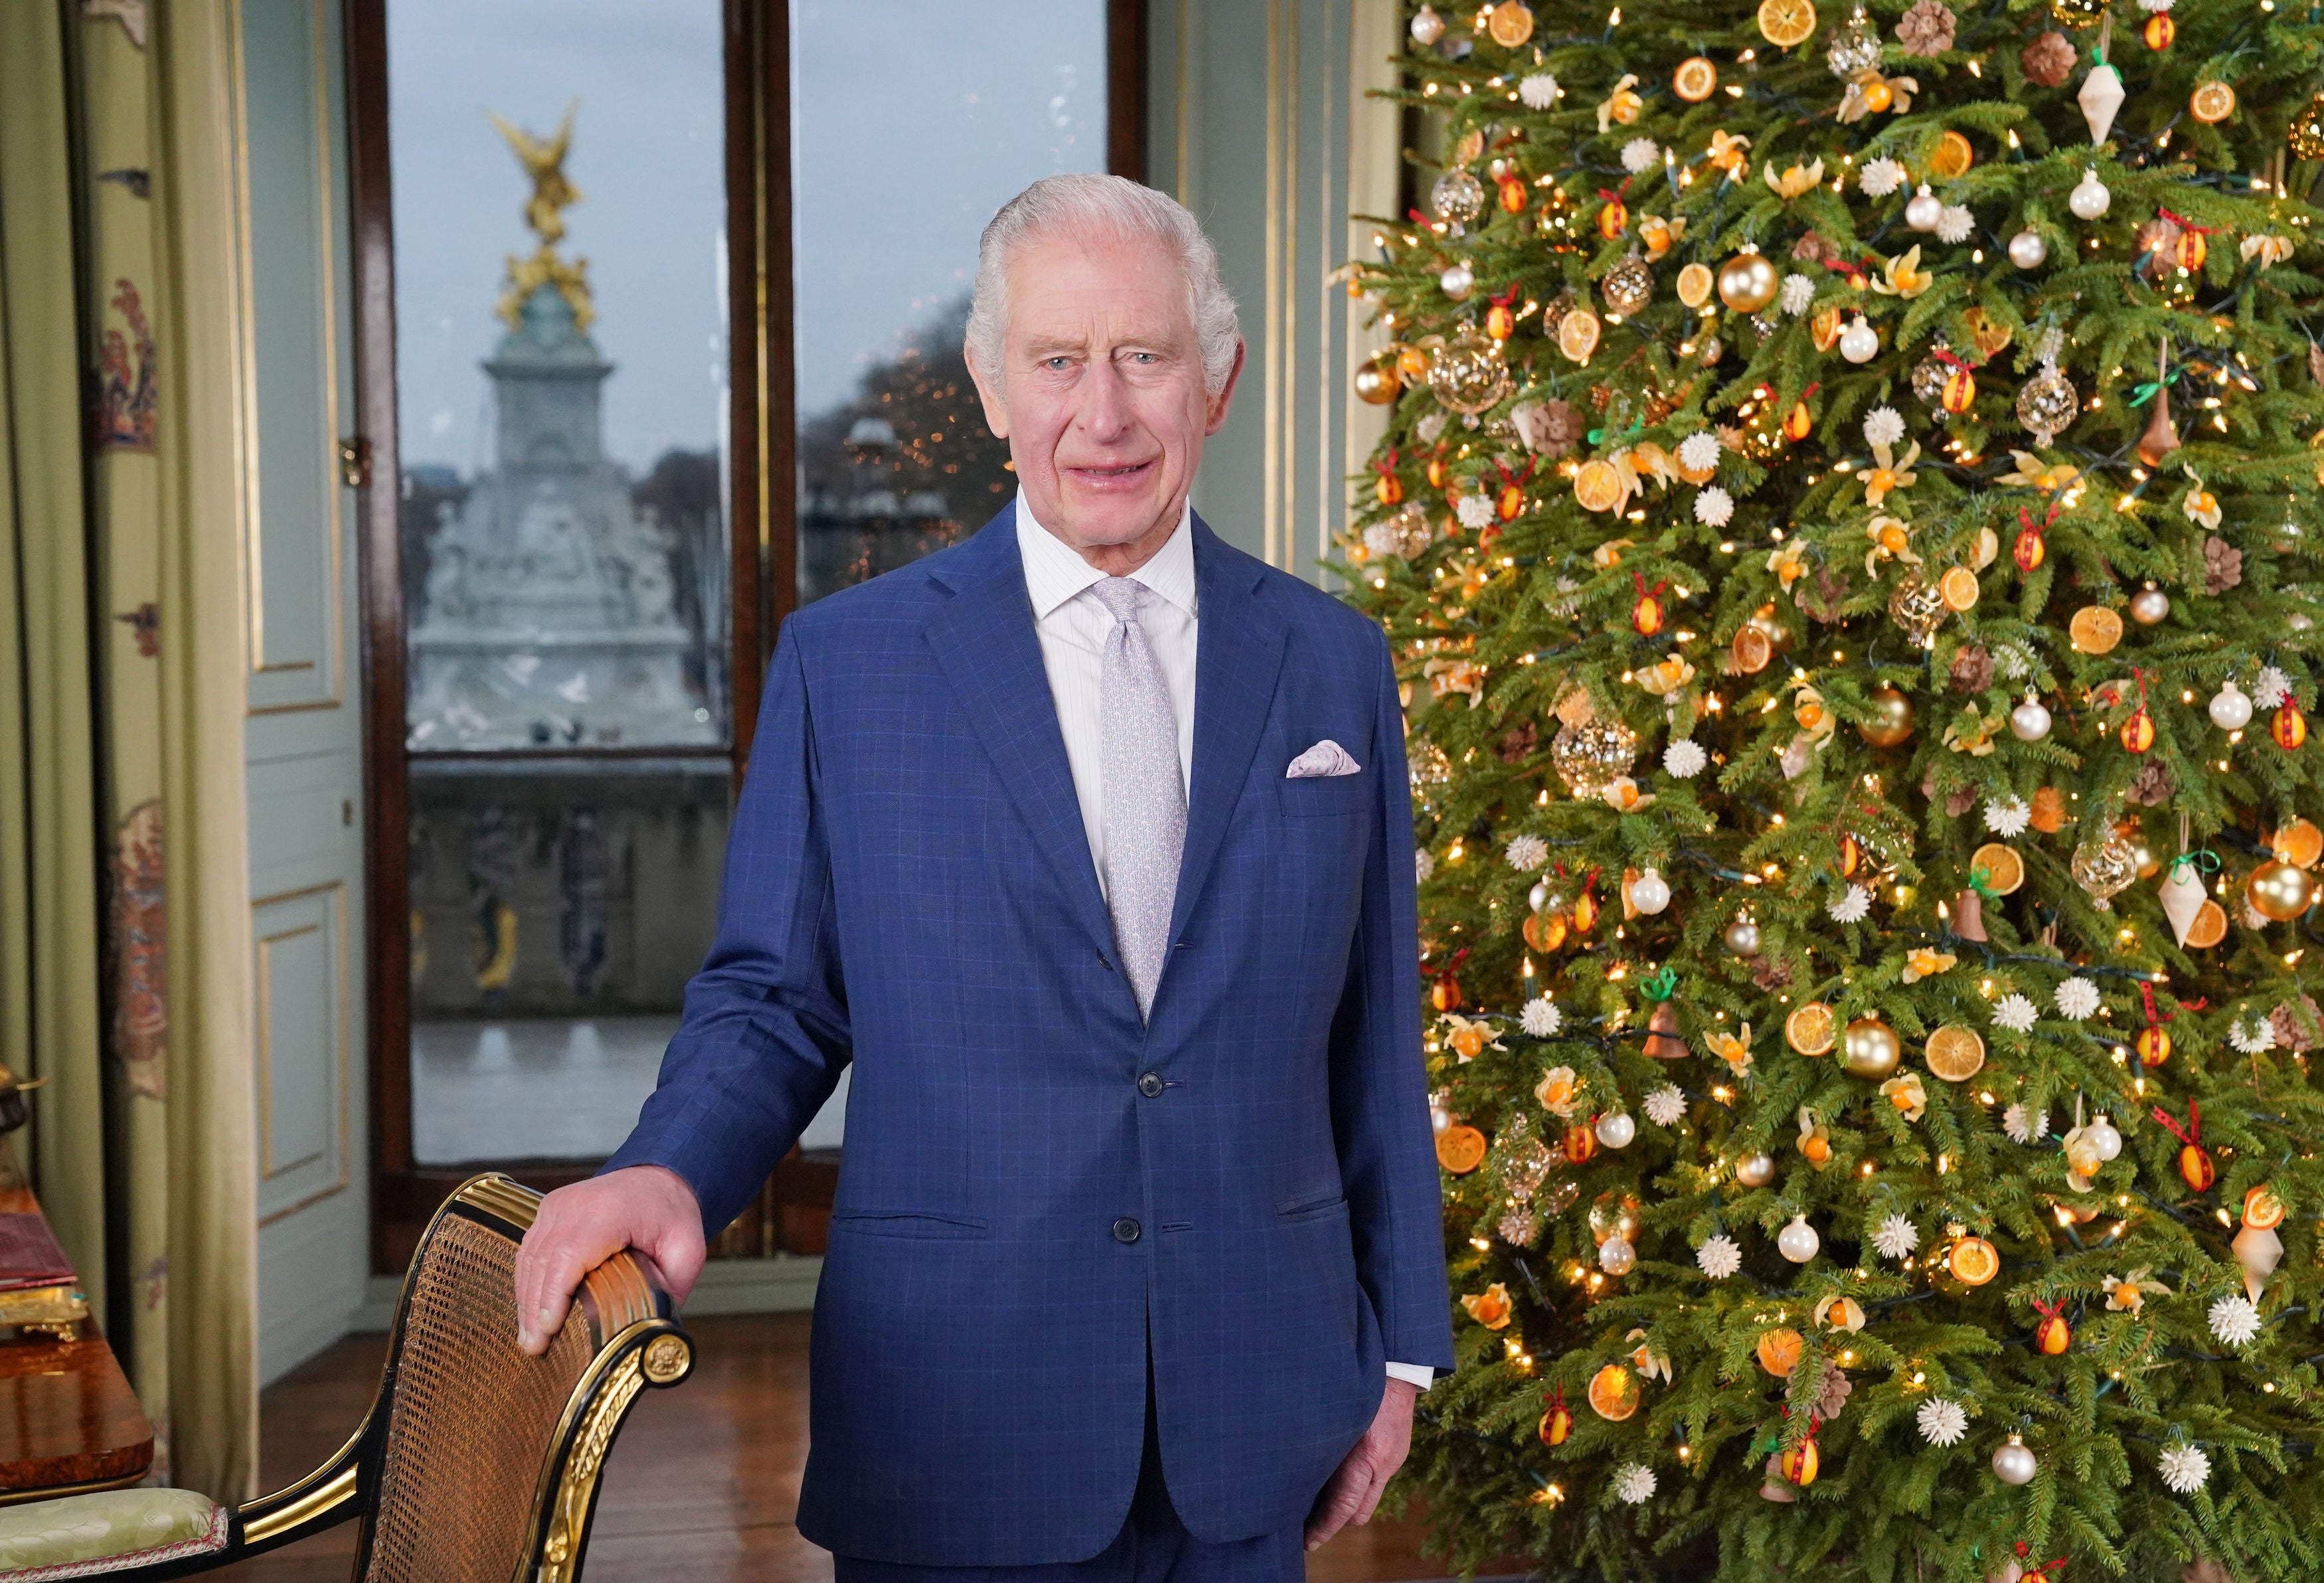 The King will soon deliver his Christmas message